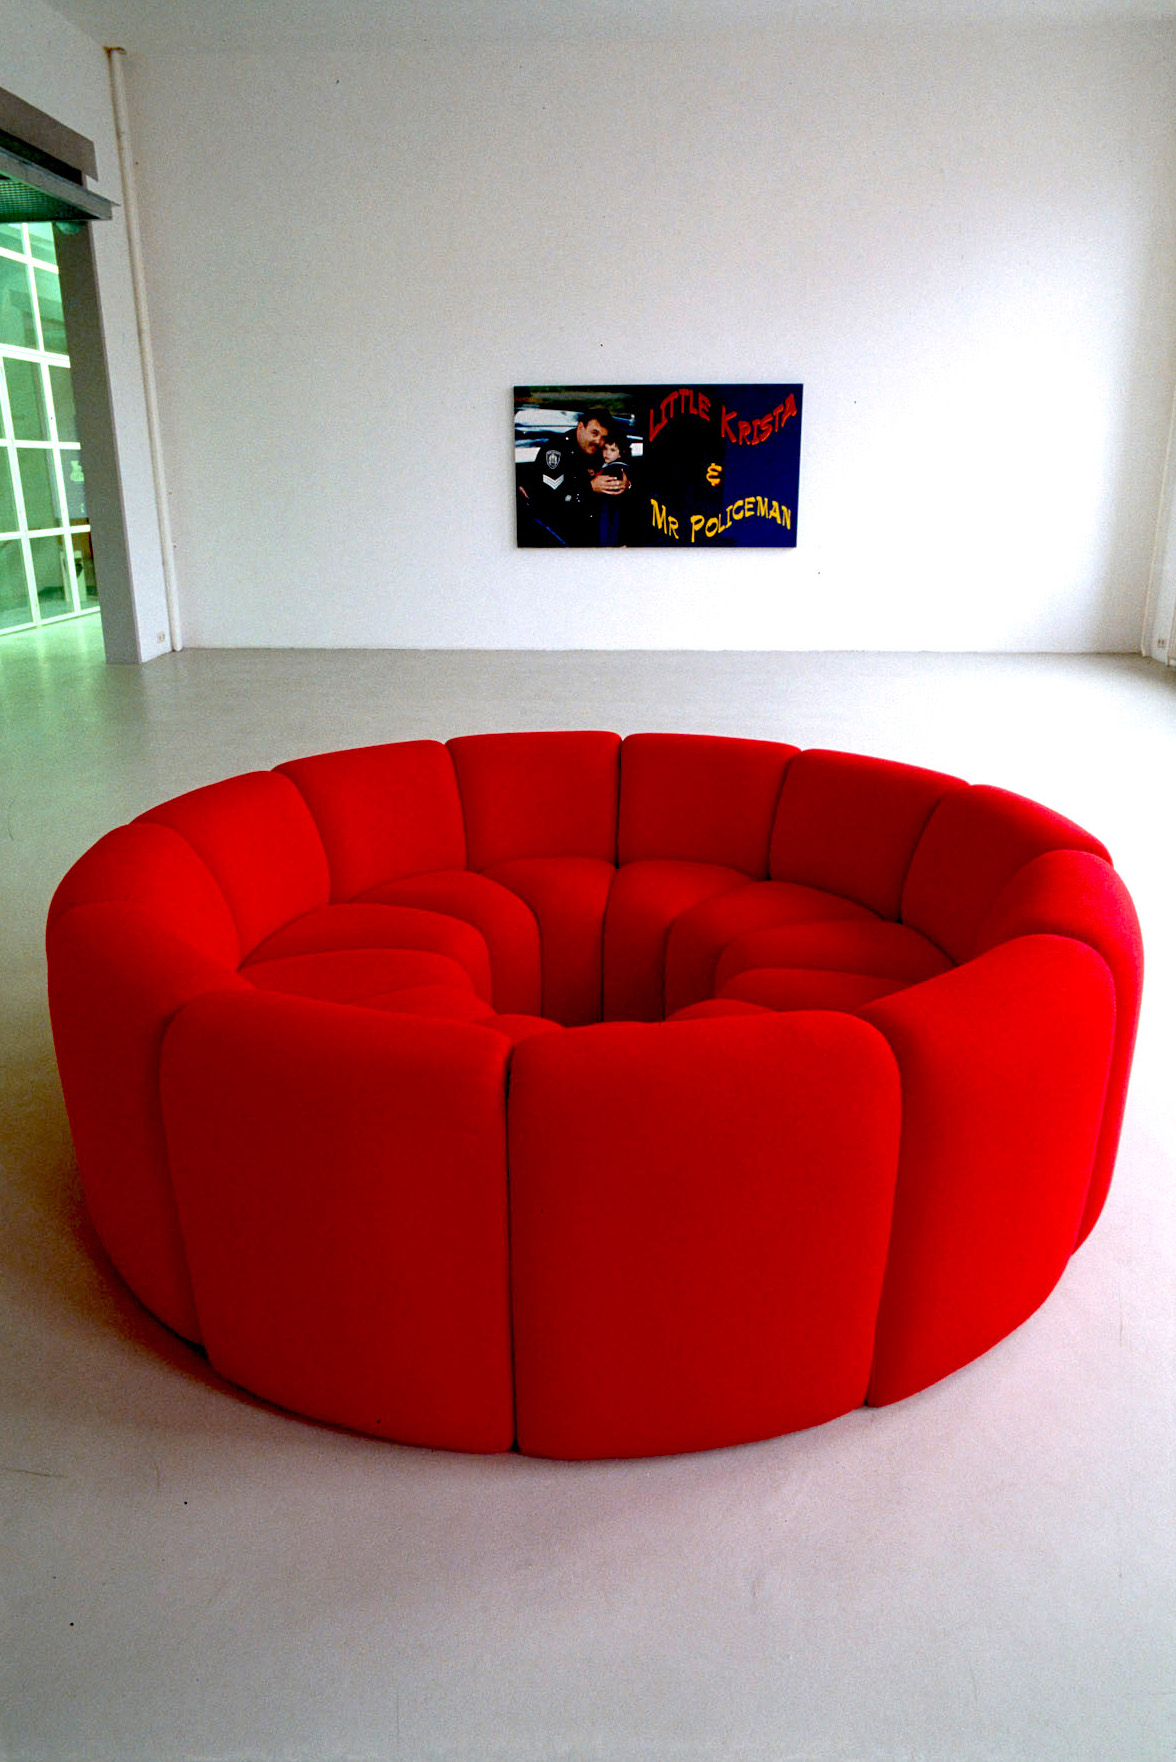 Ken Lum, Red Circle, 1986, fabric, wood, Dimensions variable. Image courtesy of the Kunstinstituut Melly.